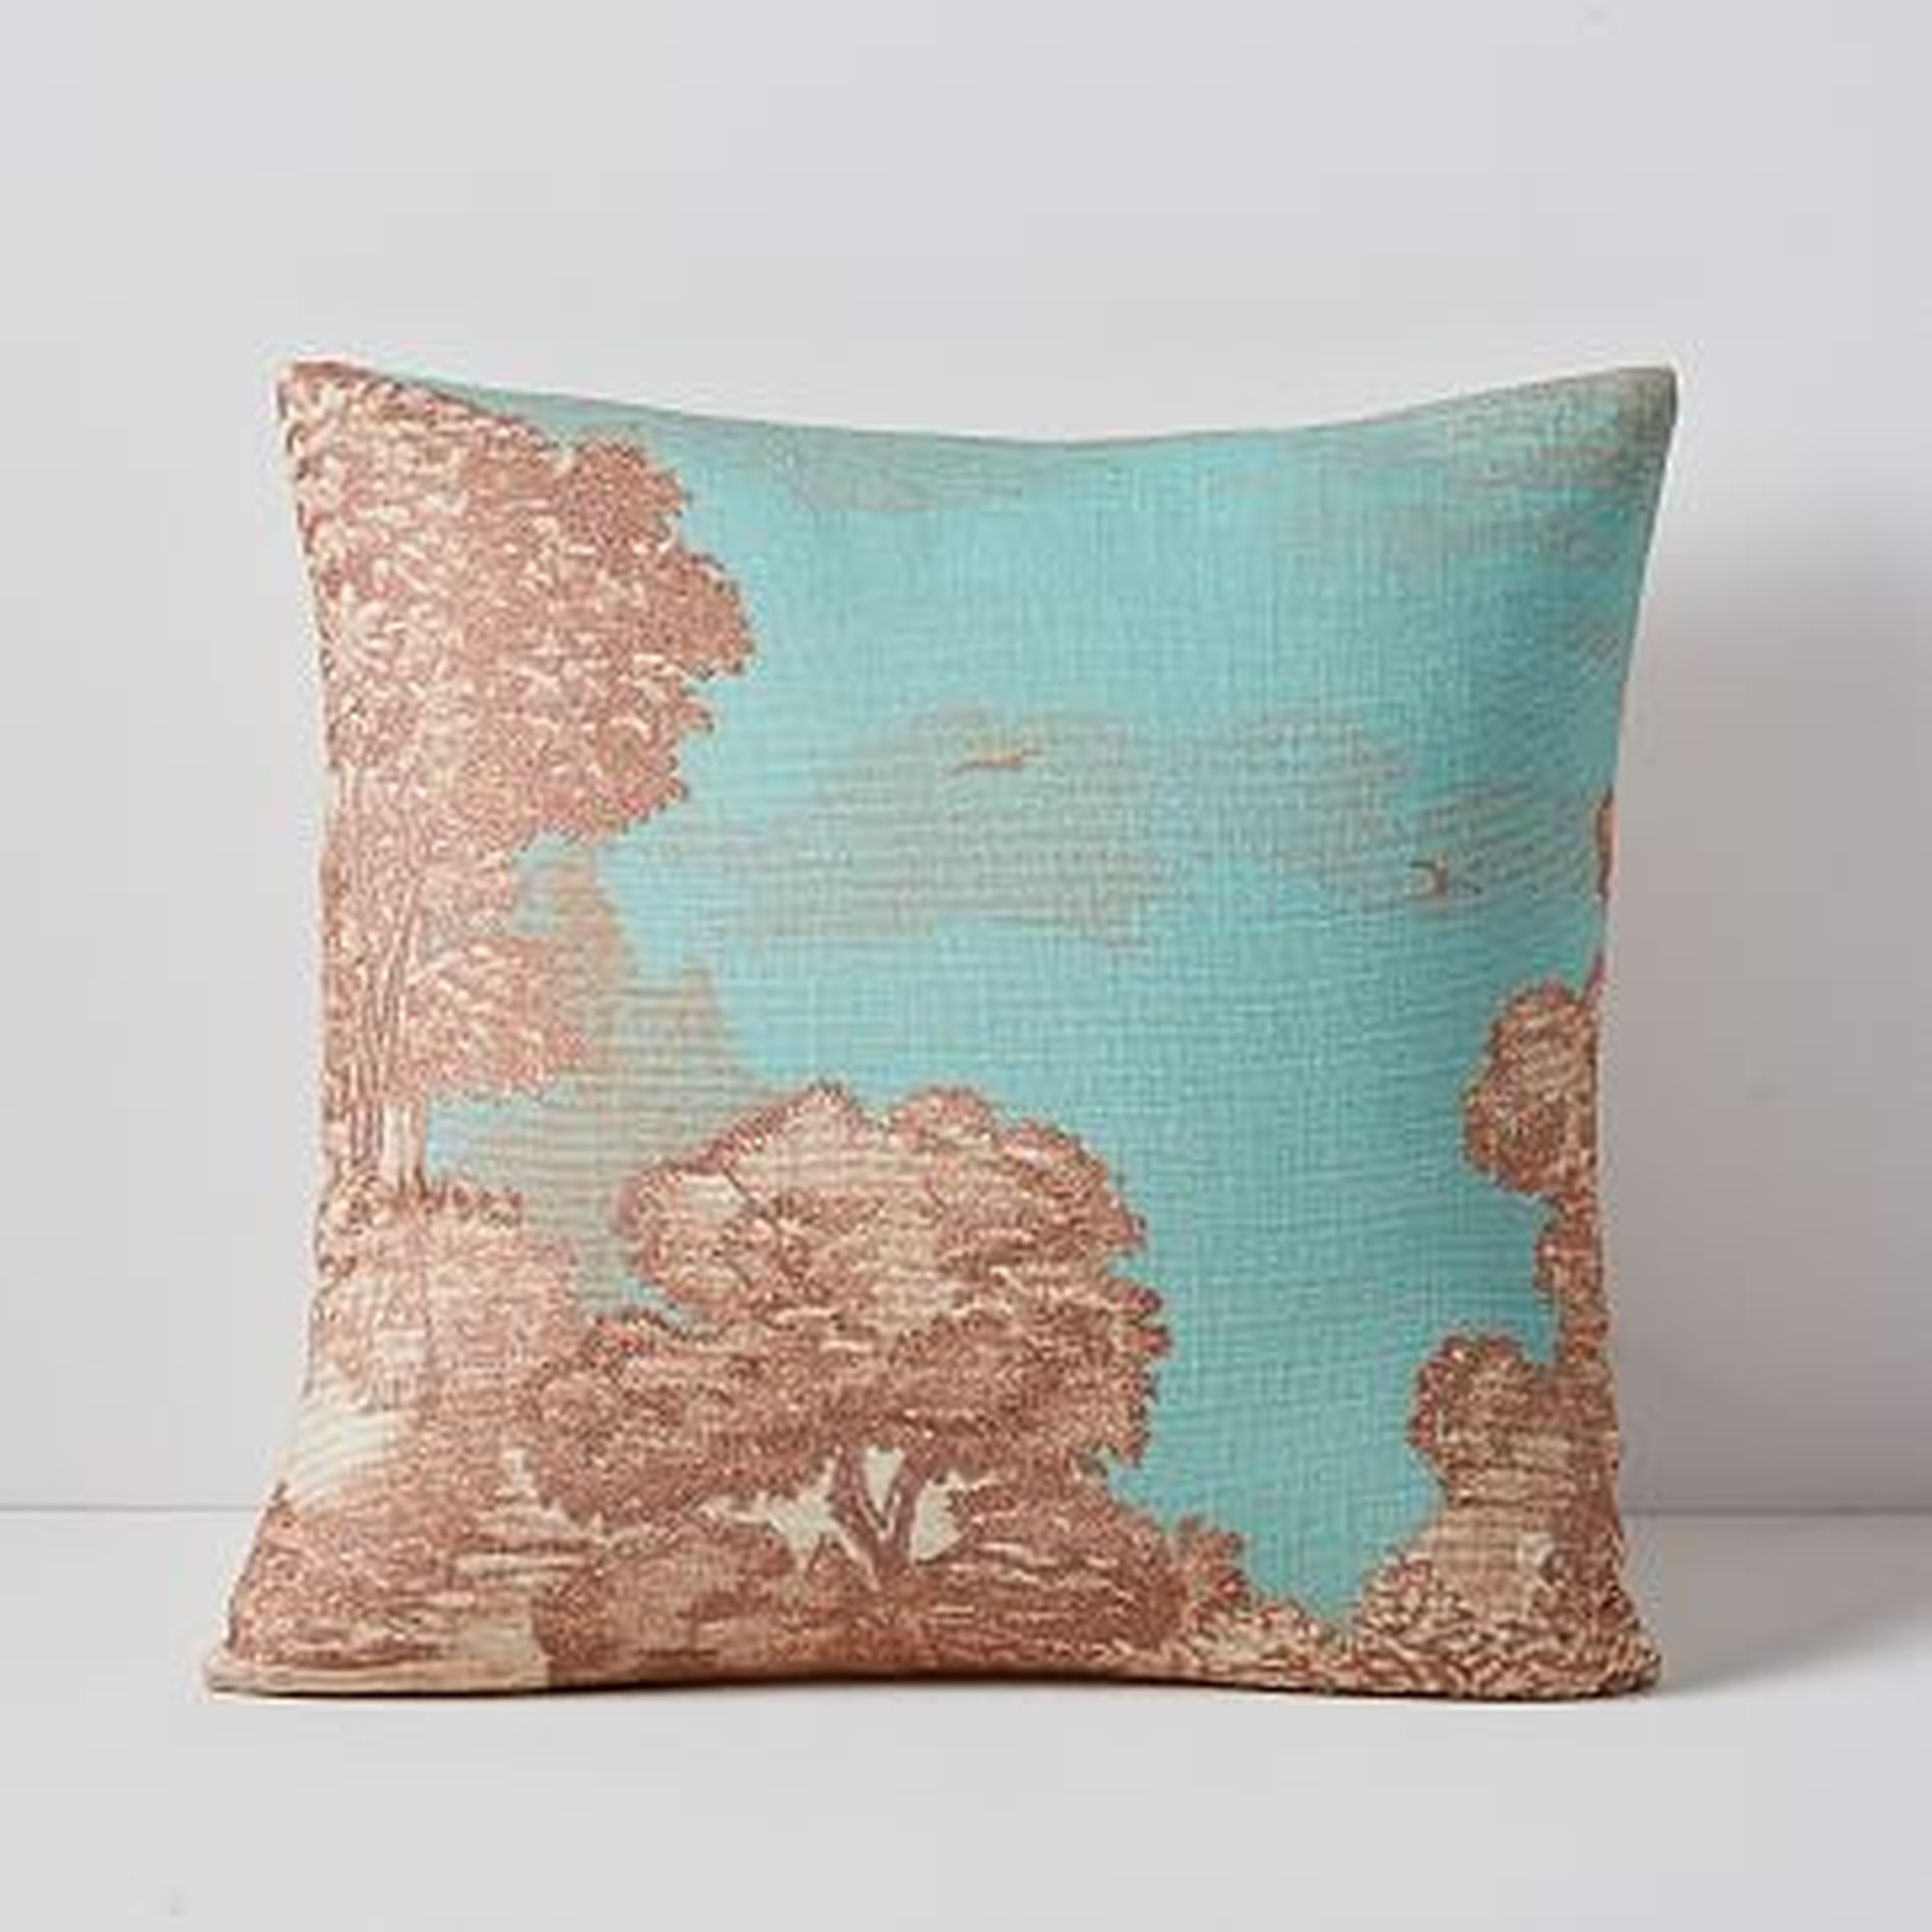 Embroidered Etched Landscape Pillow Cover, 18"x18", Sunstone - West Elm